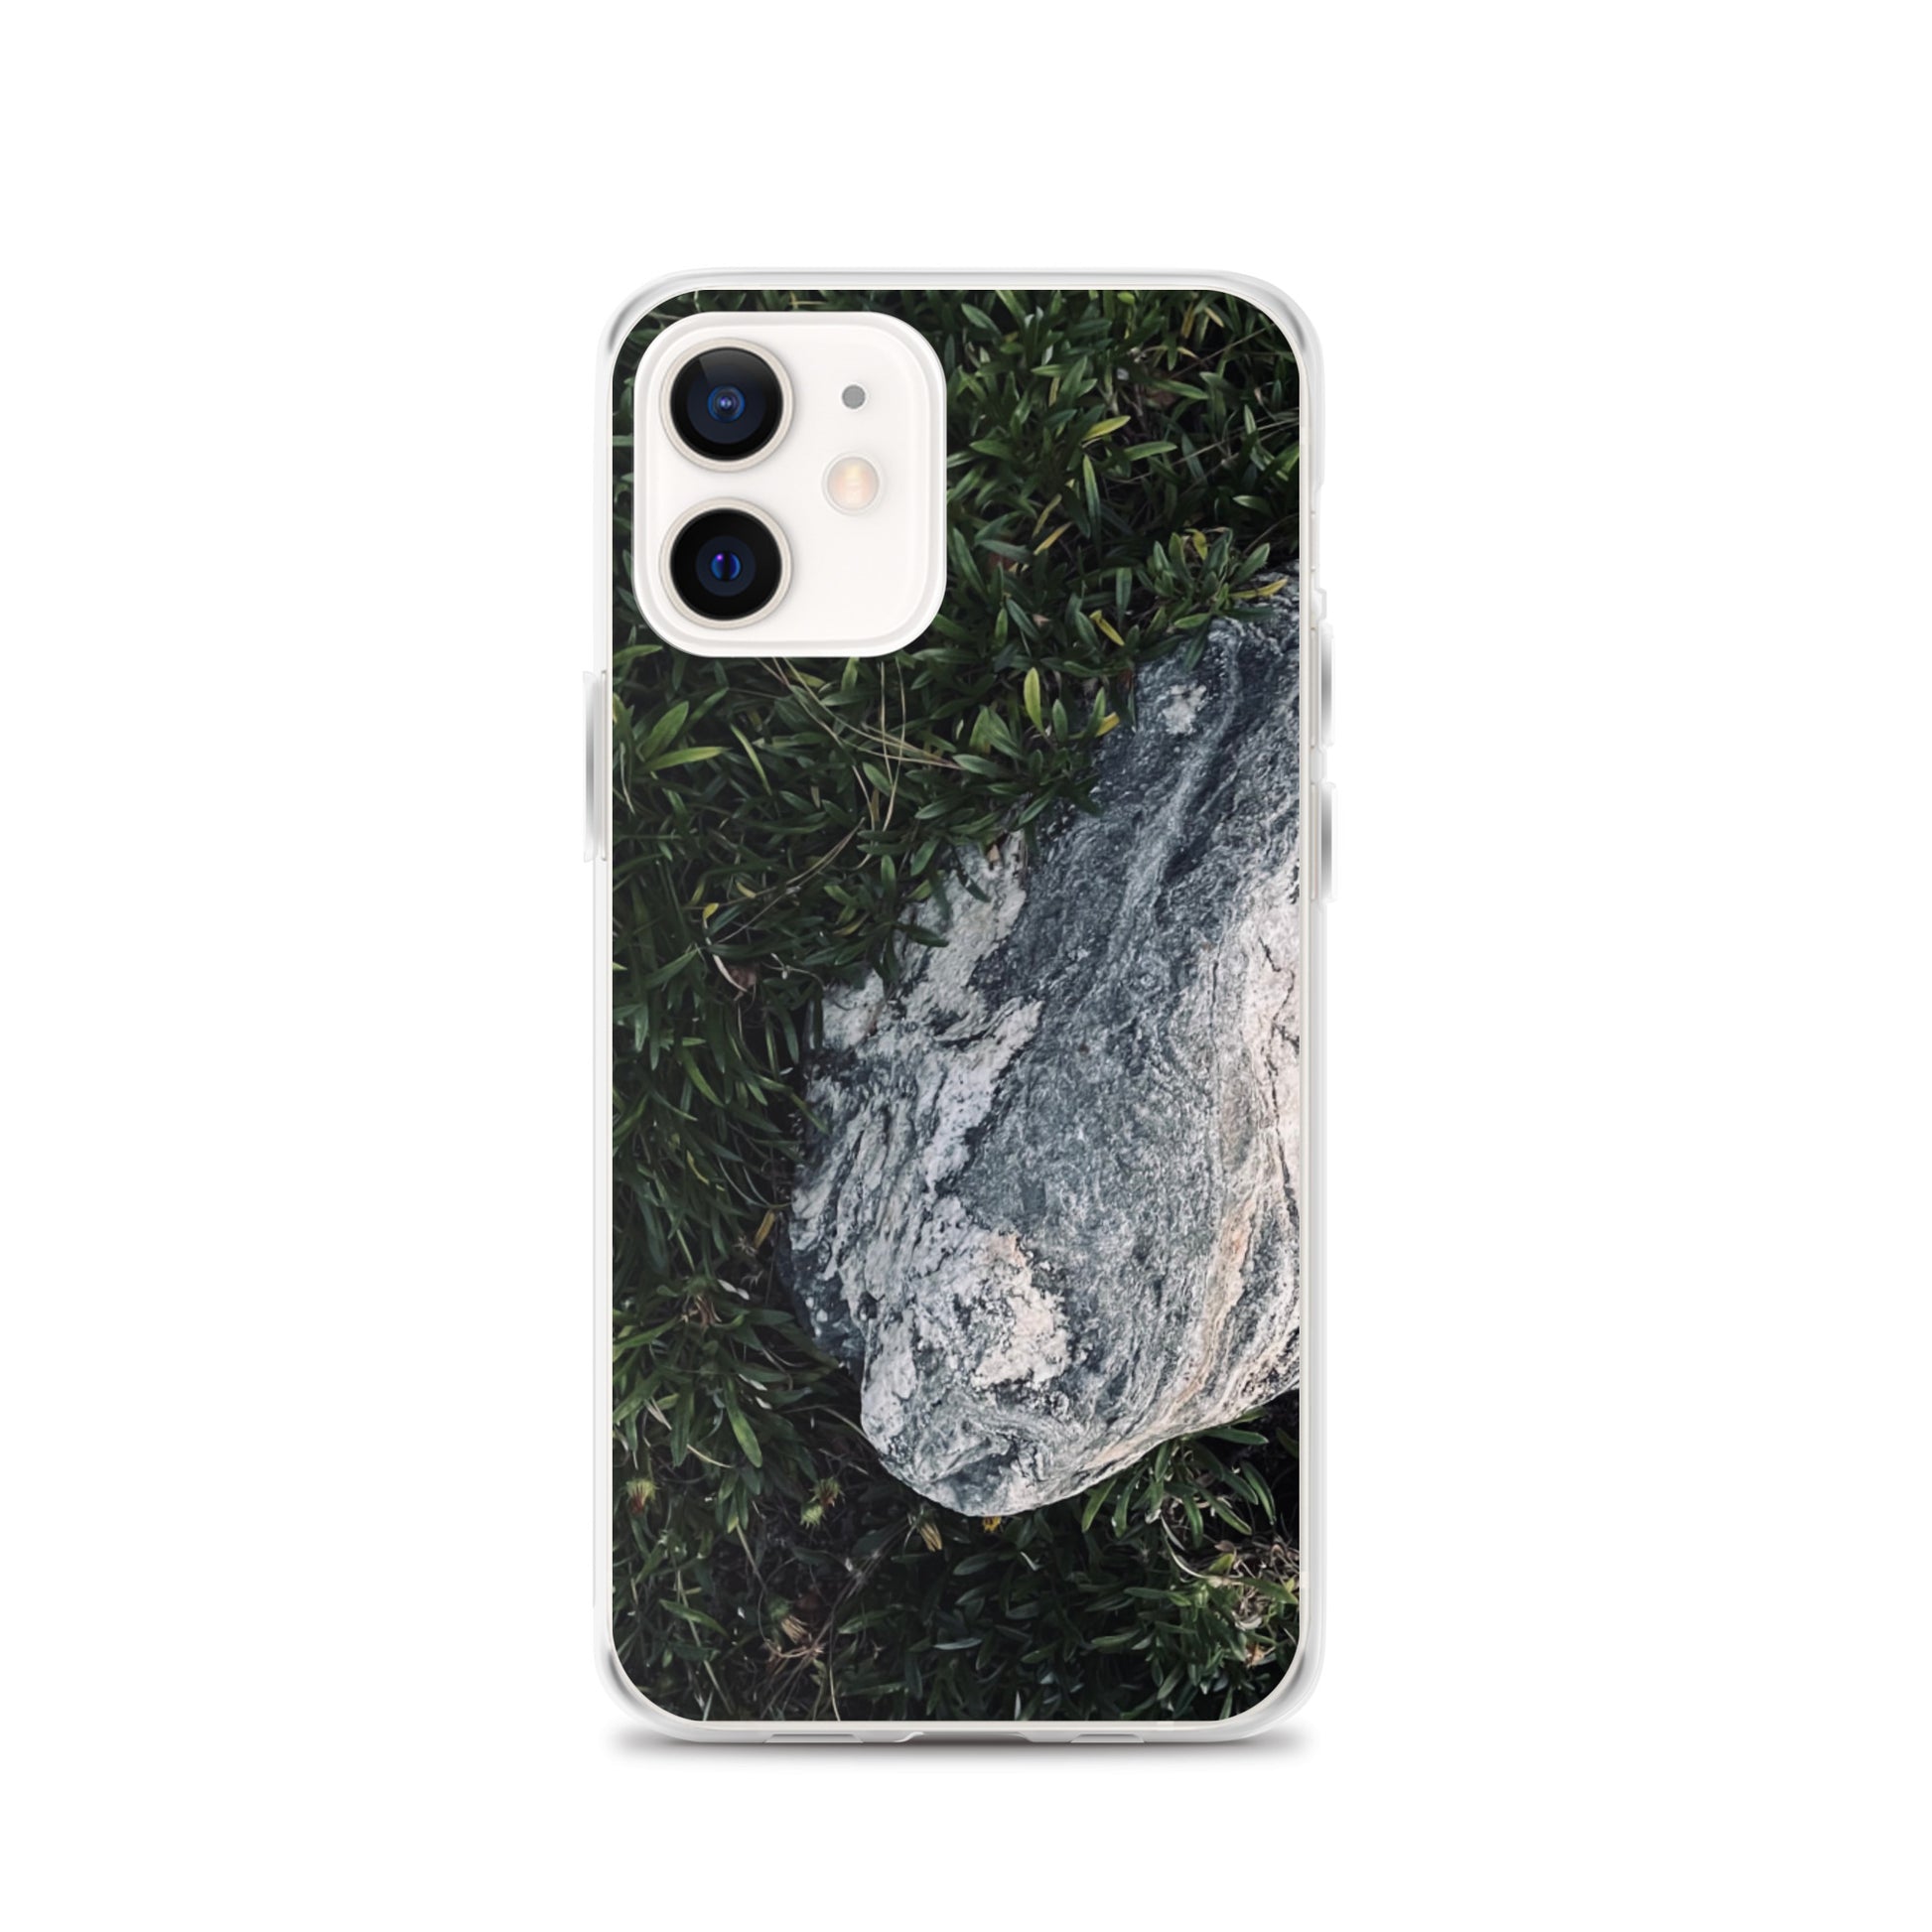 Between a Rock and a Soft Place (iPhone Case) - Comfortable Culture - iPhone 12 - Mobile Phone Cases - Comfortable Culture